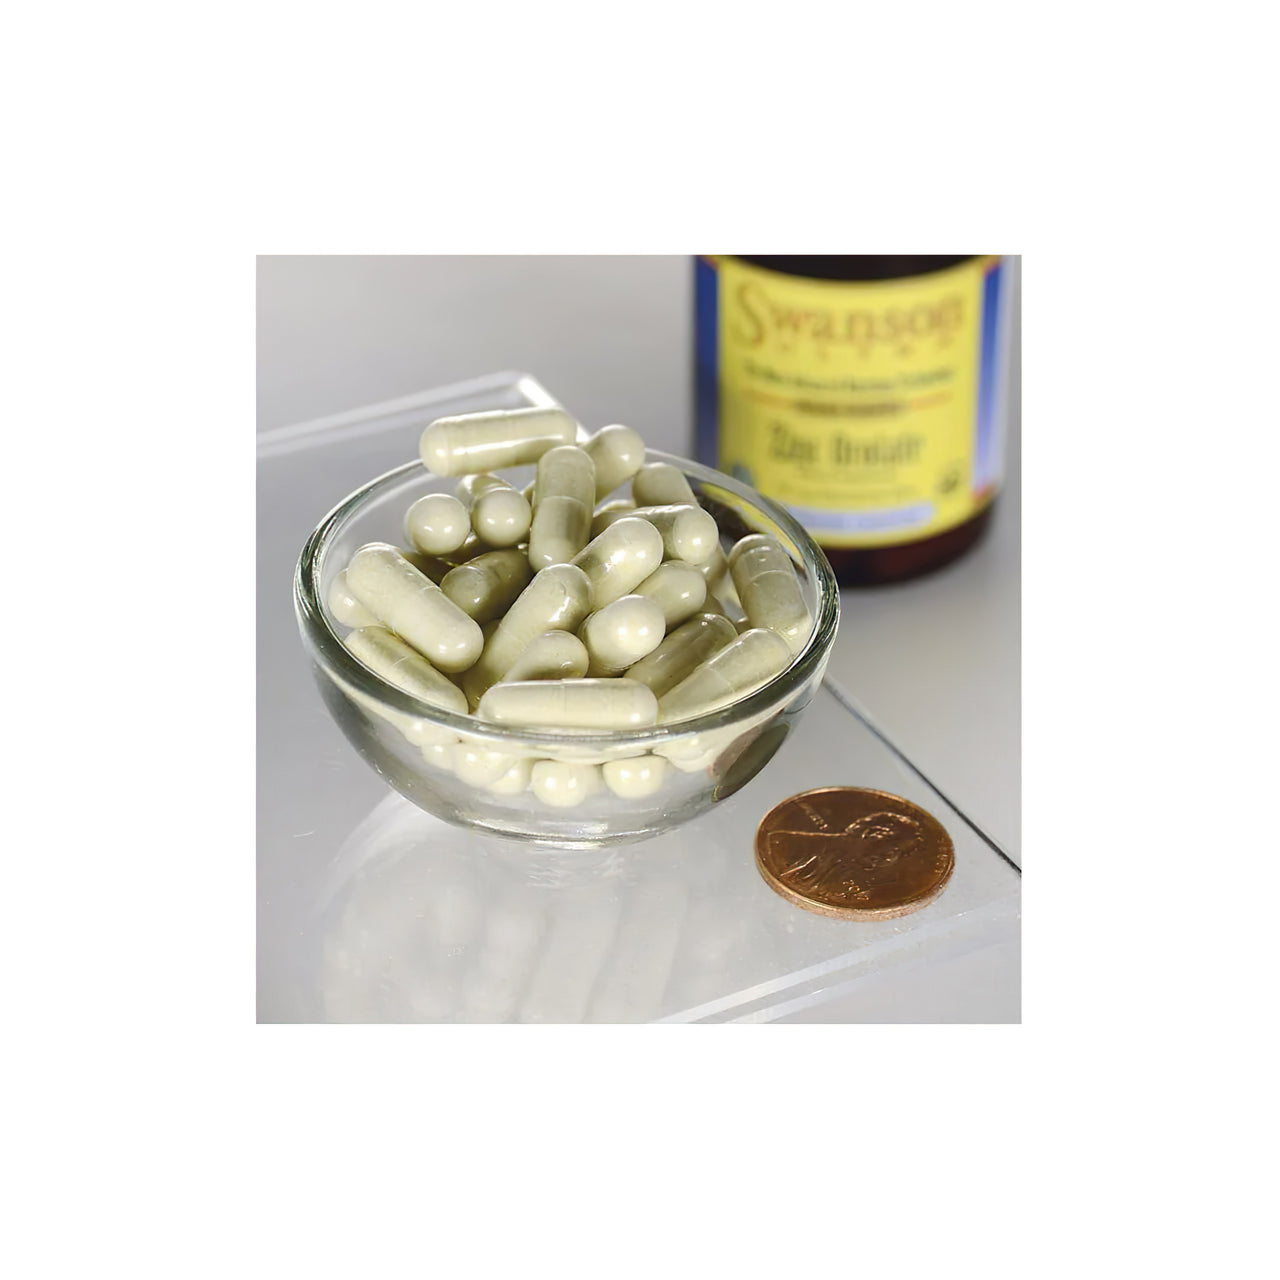 A bowl of Swanson Zinc Orotate 10 mg 60 veg caps next to a bottle of orotic acid pills with high-bioavailability mineral salt.